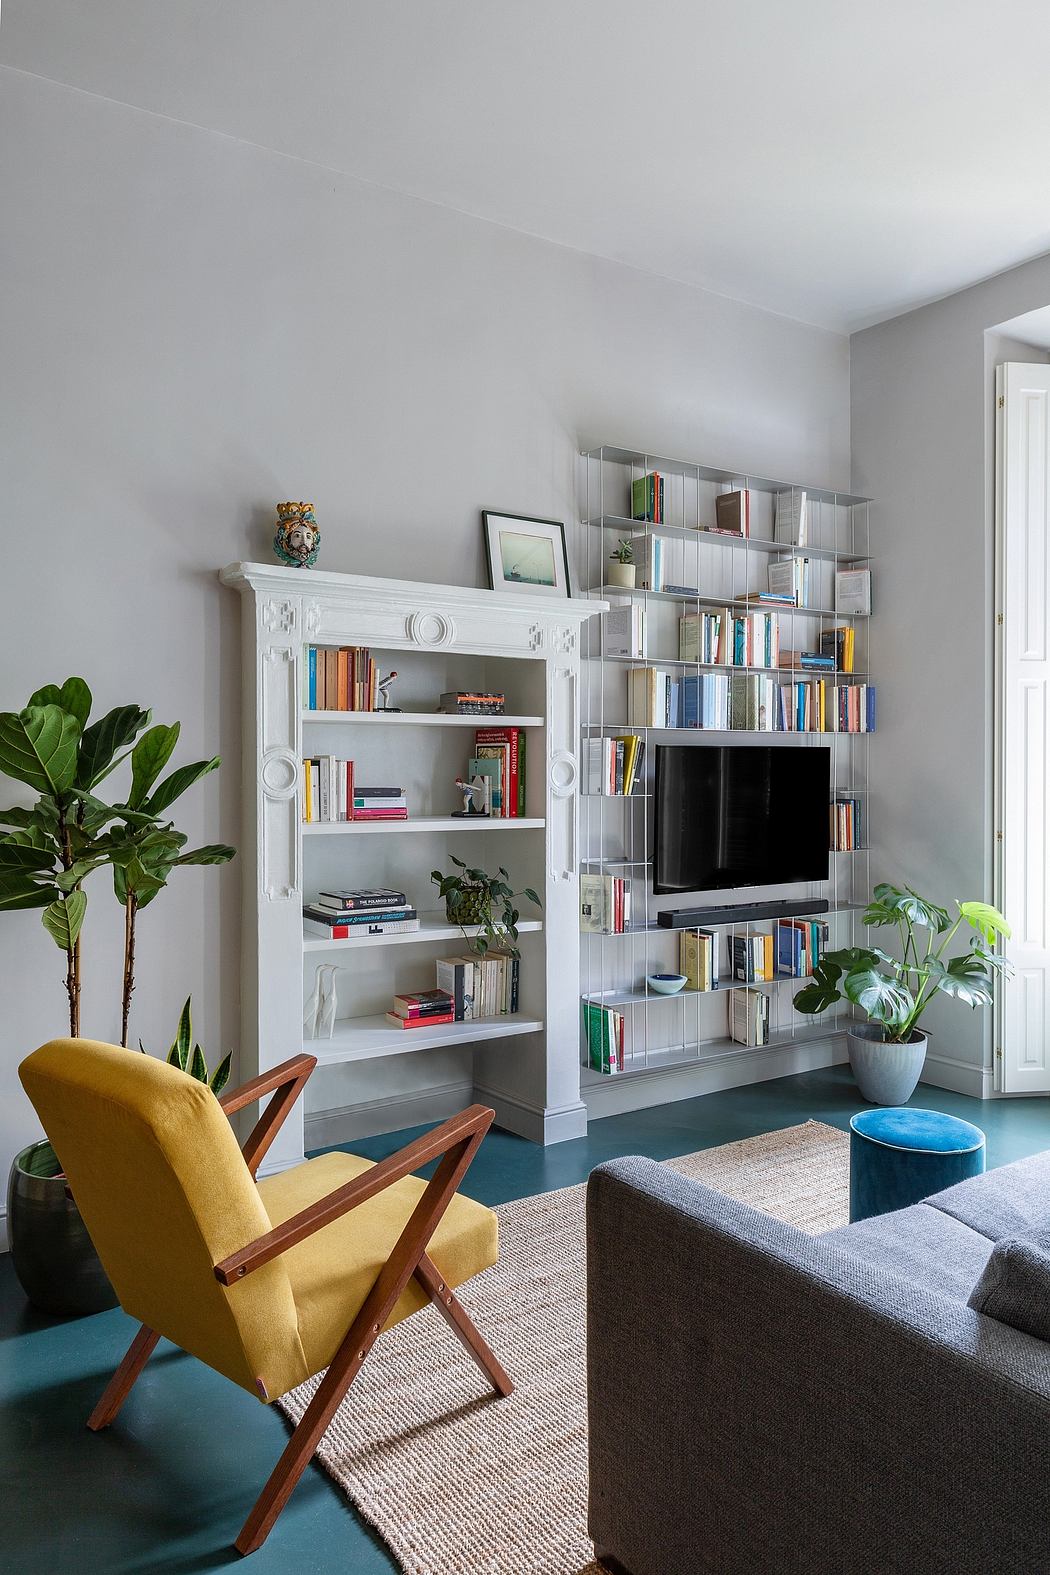 Contemporary living room with bookshelves and yellow armchair.